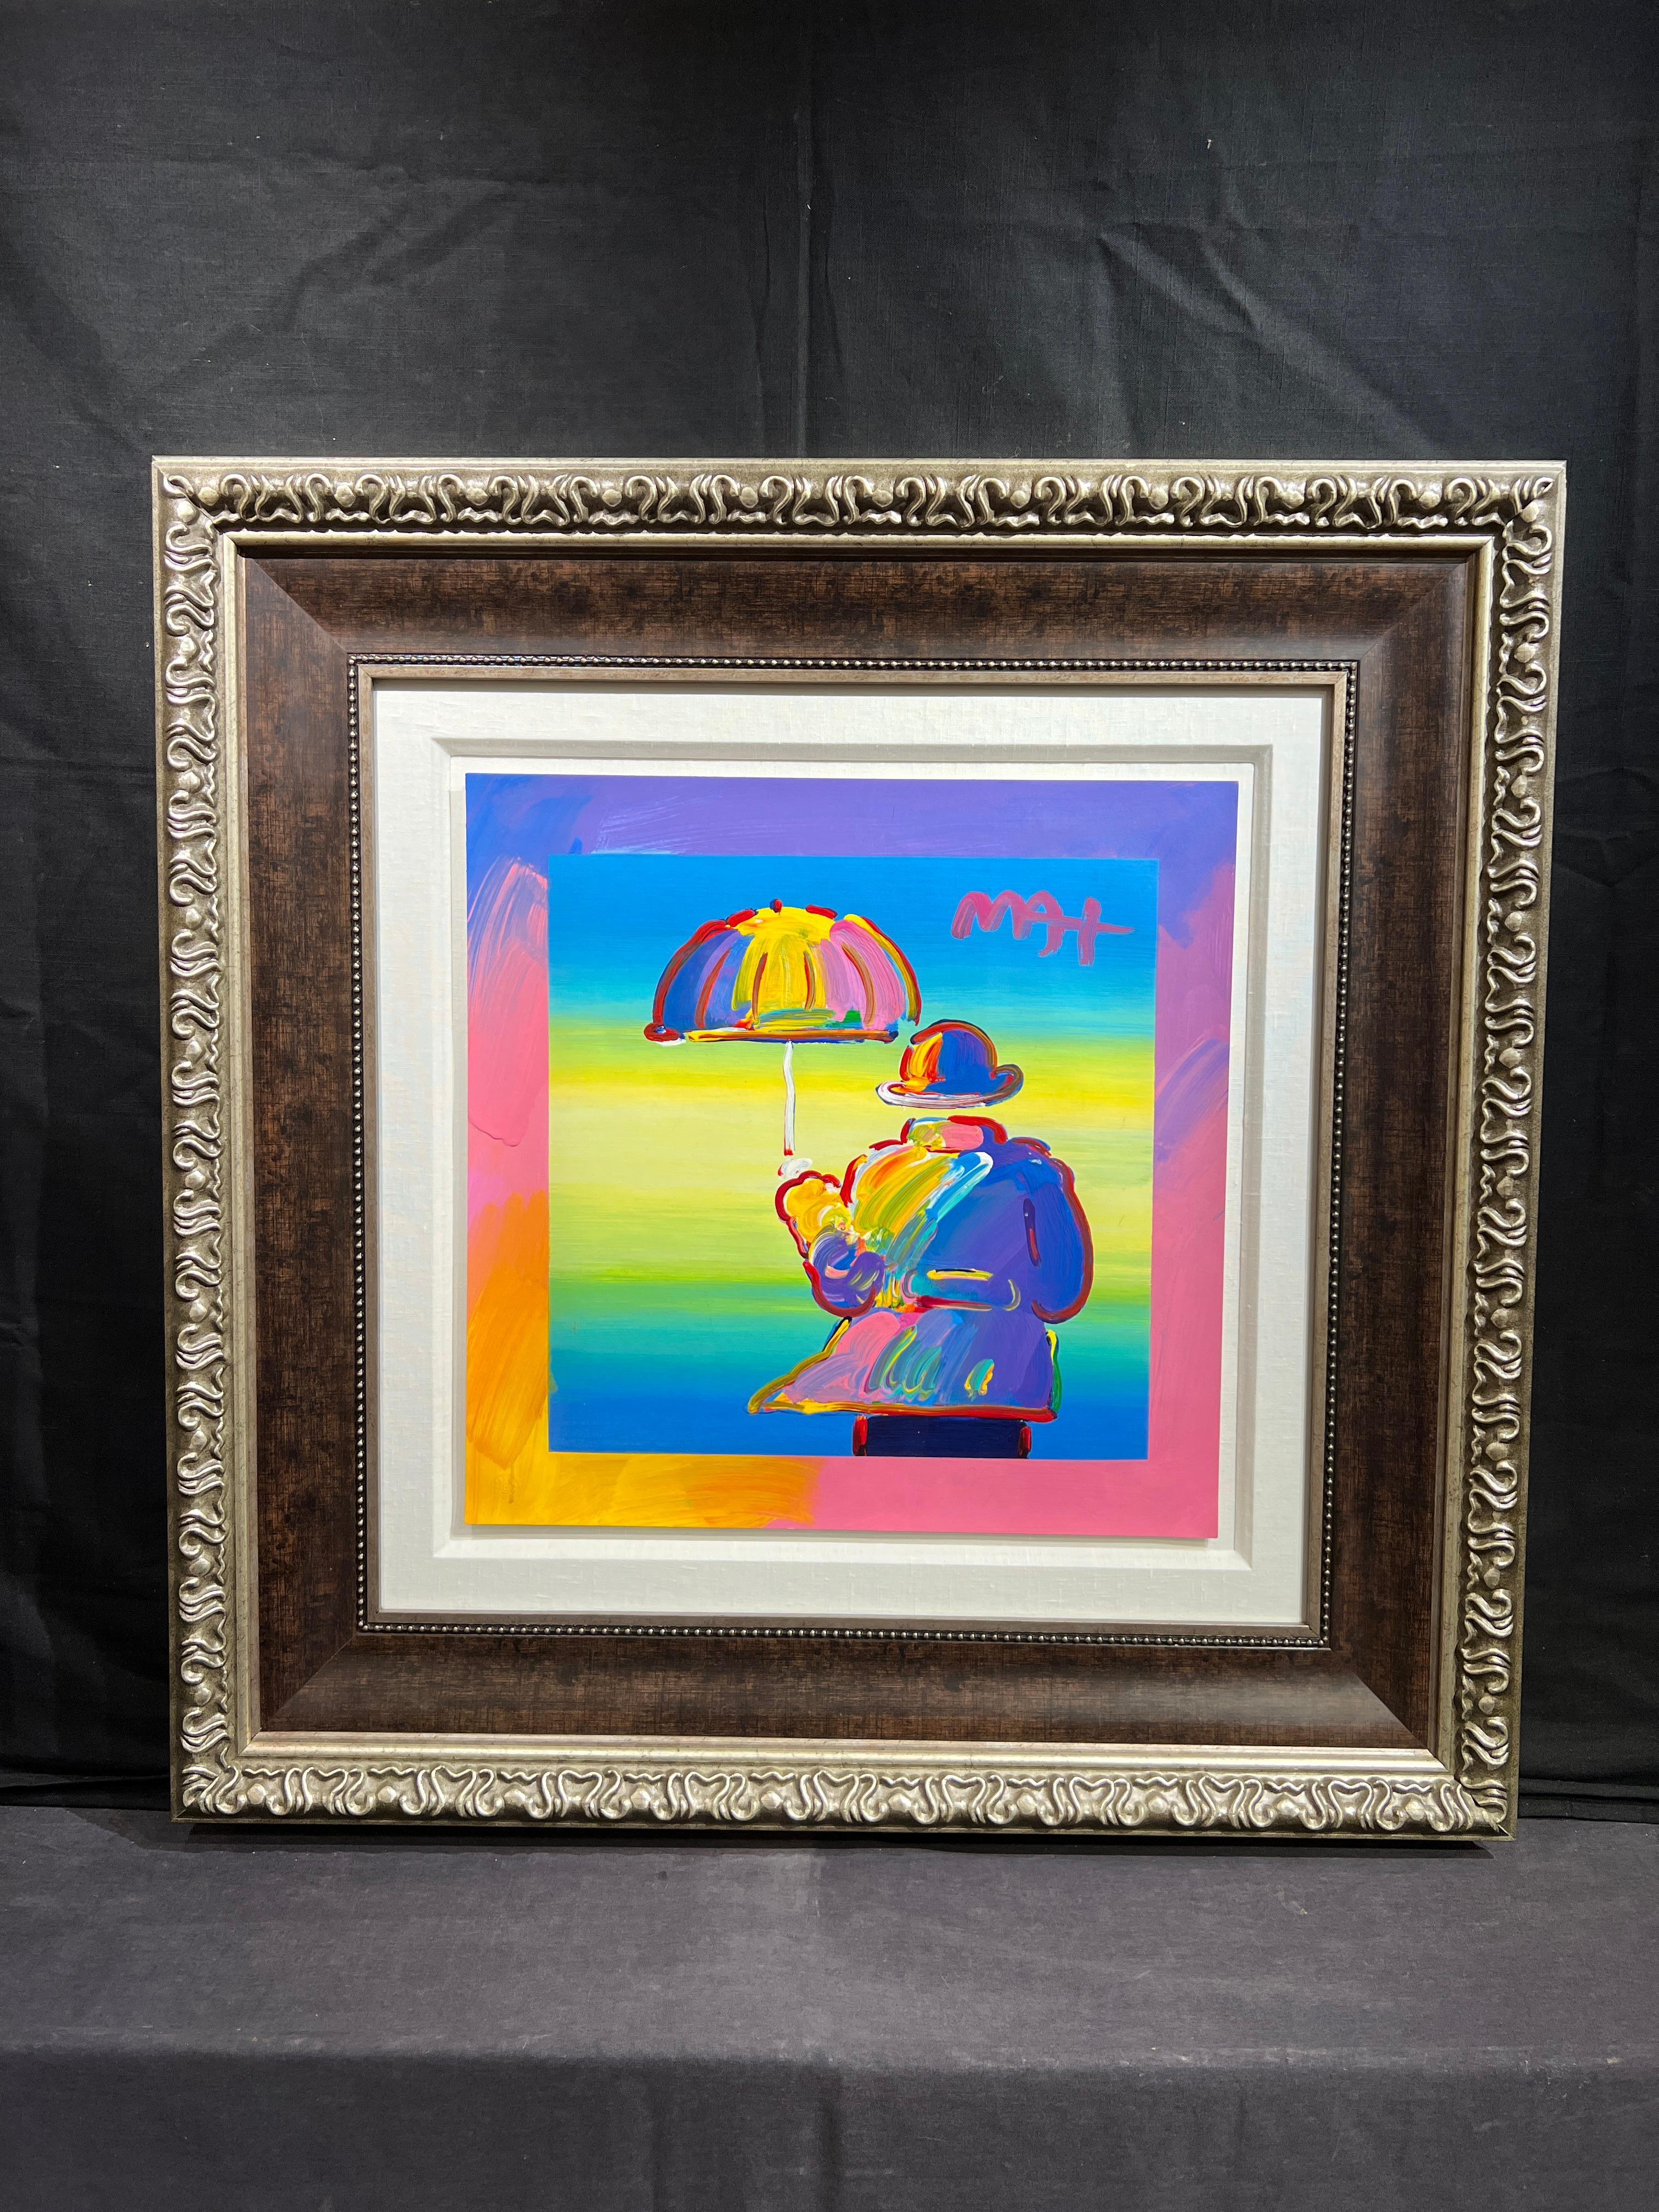 Umbrella Man
Peter Max (German, b. 1937)
Signed Upper Right
19.75 x 20 inches
36 x 36 inches with frame

Peter Max, born Peter Max Finkelstein,  is a multi-dimensional artist focused on contemporary events.  When he left art school in the 1960s he